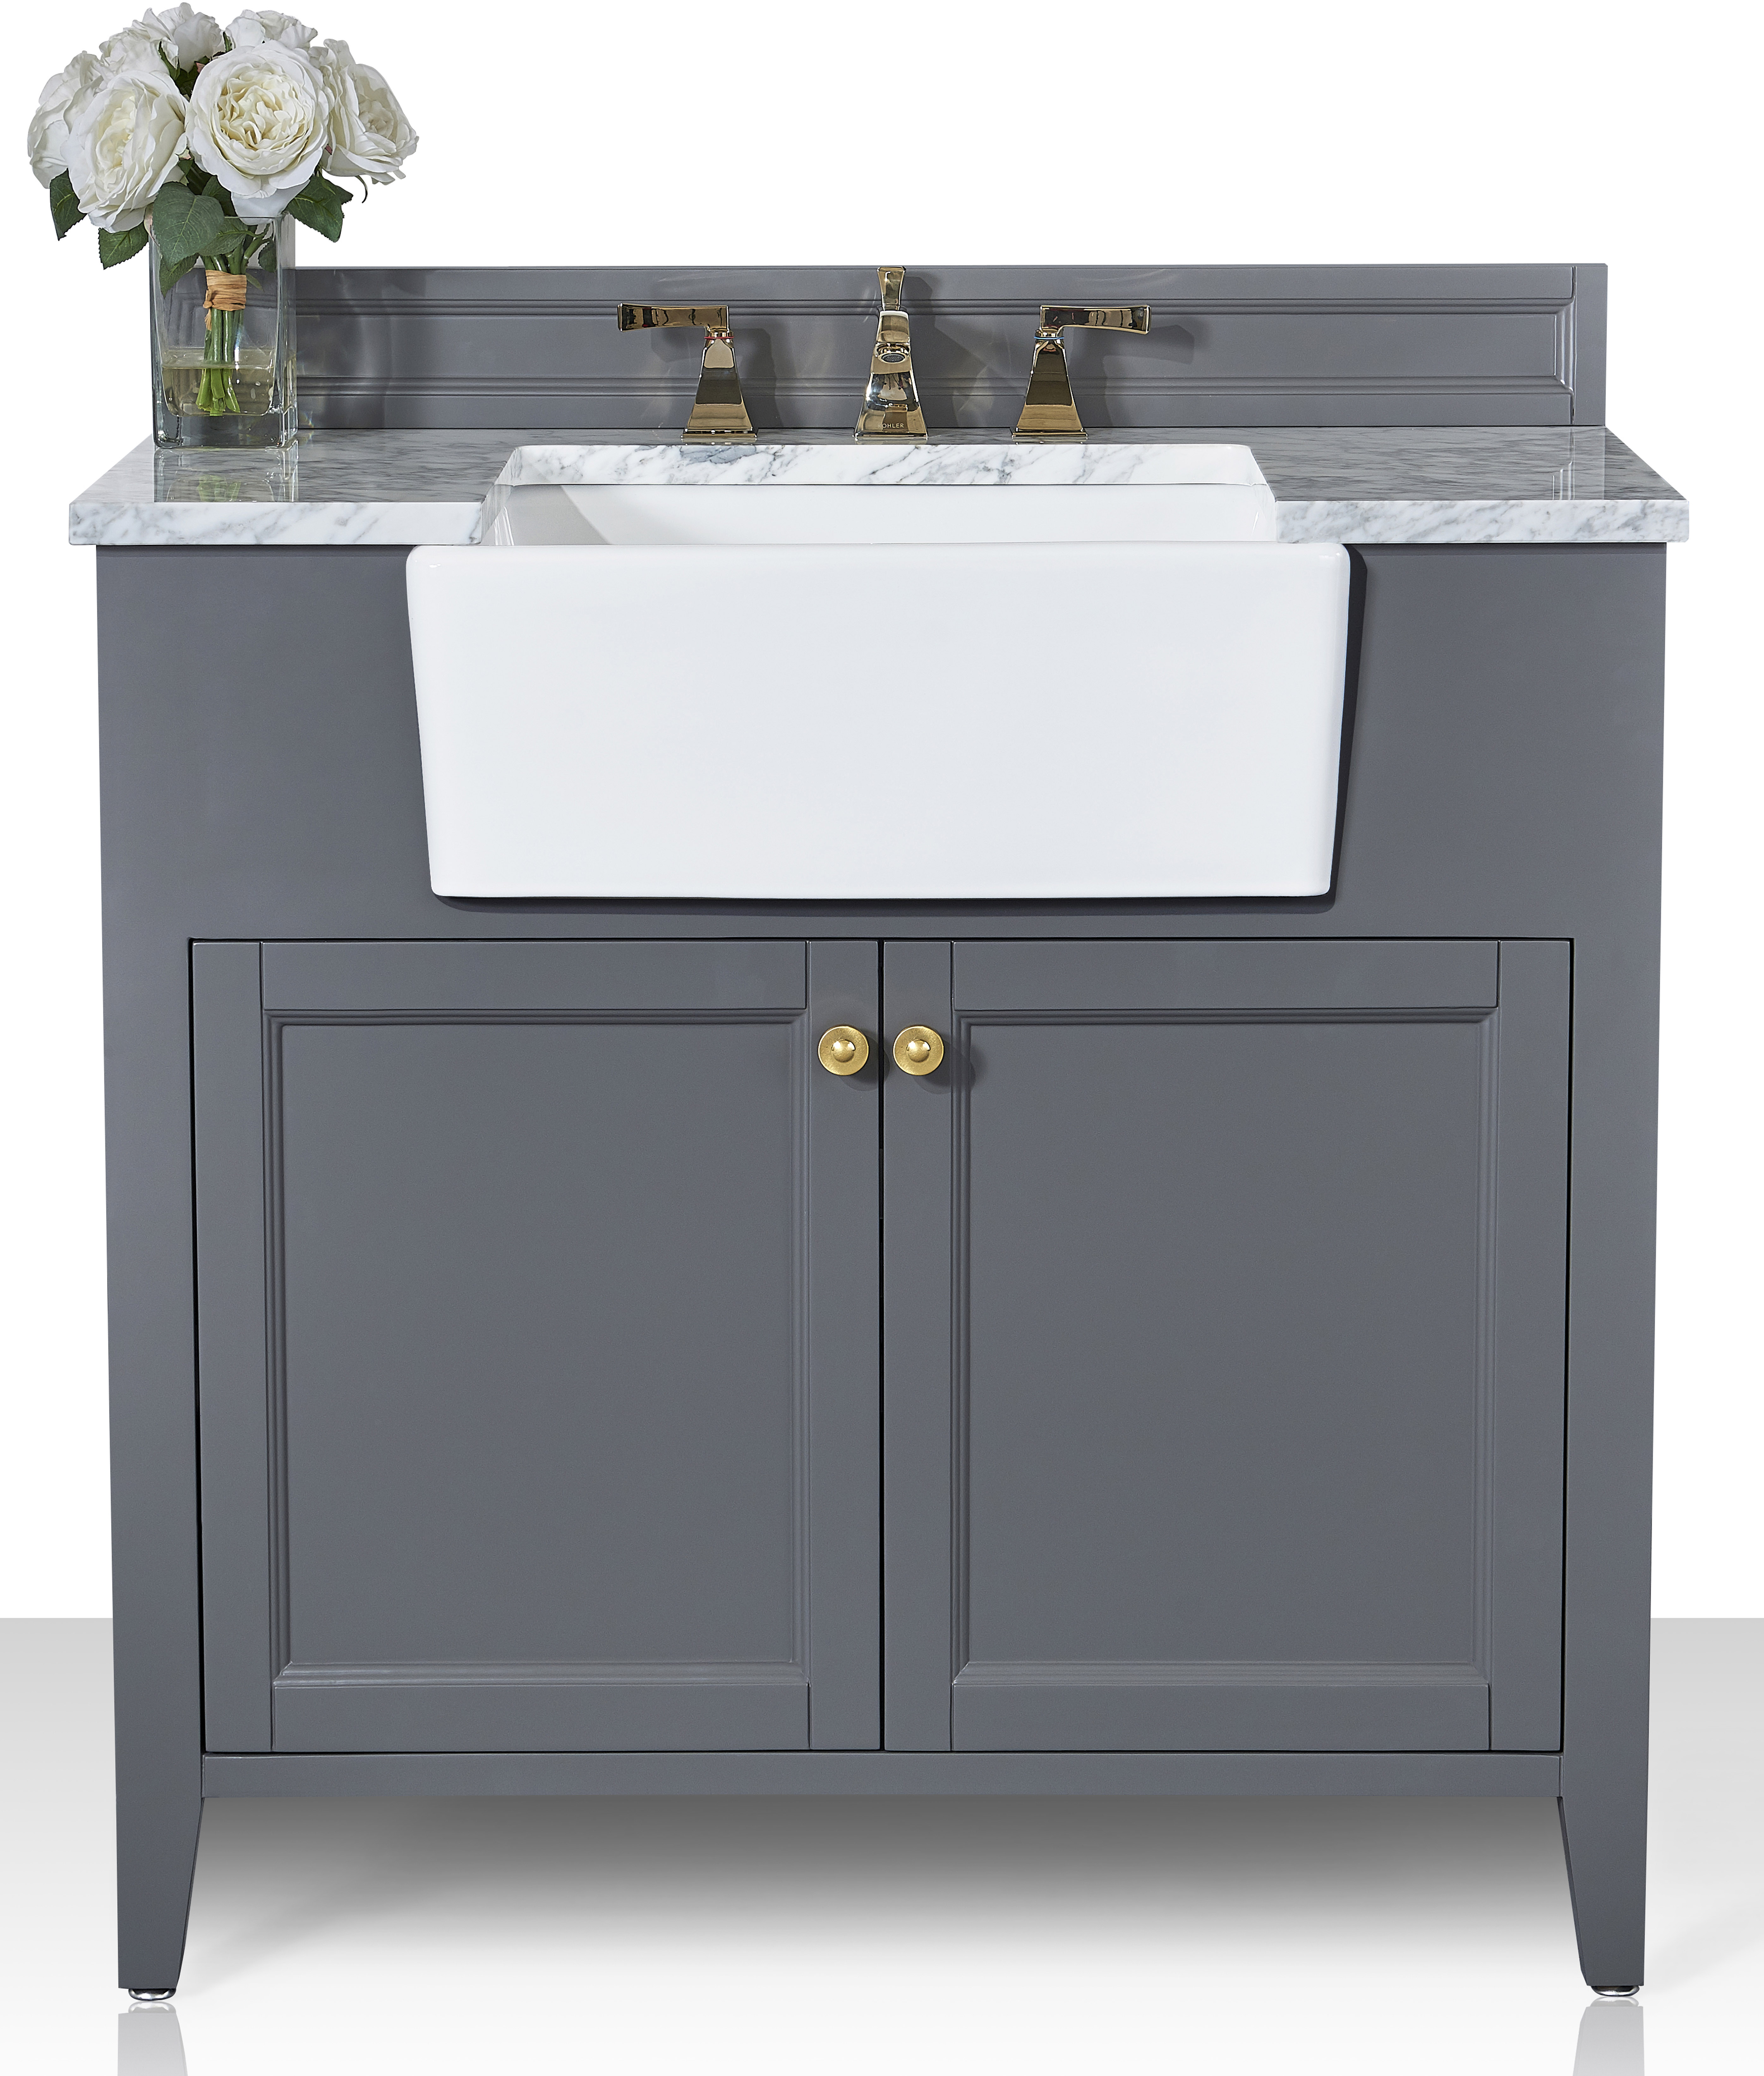 36" Bath Vanity Set in Sapphire Gray with Italian Carrara White Marble Vanity Top and White Undermount Basin with Gold Hardware